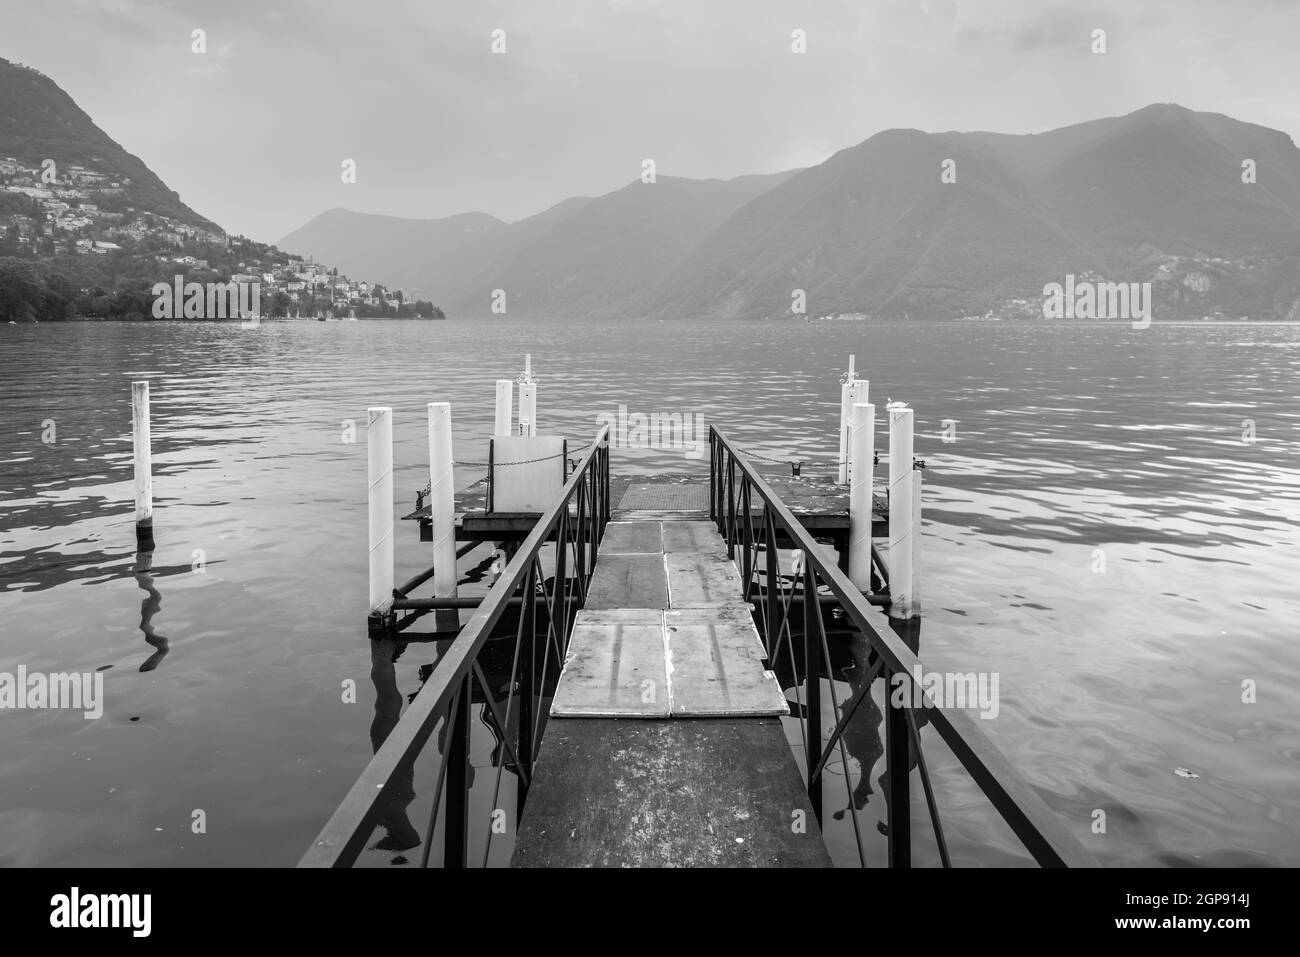 Boat pier on the Lake Lugano, Switzerland. Black and white photography. European vacation, travel and nautical concept. Stock Photo